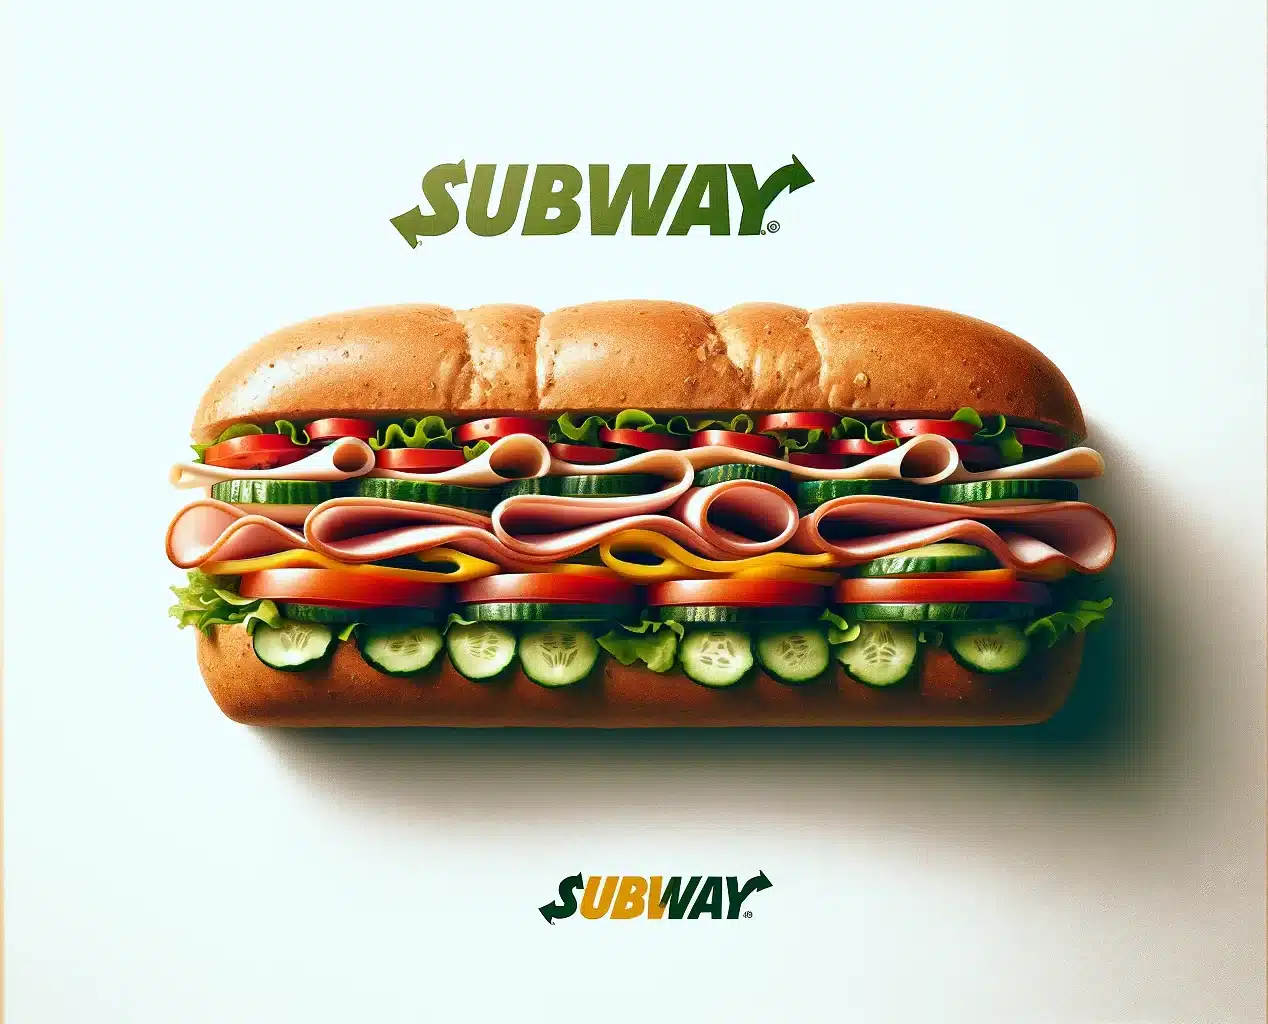 subway featured image